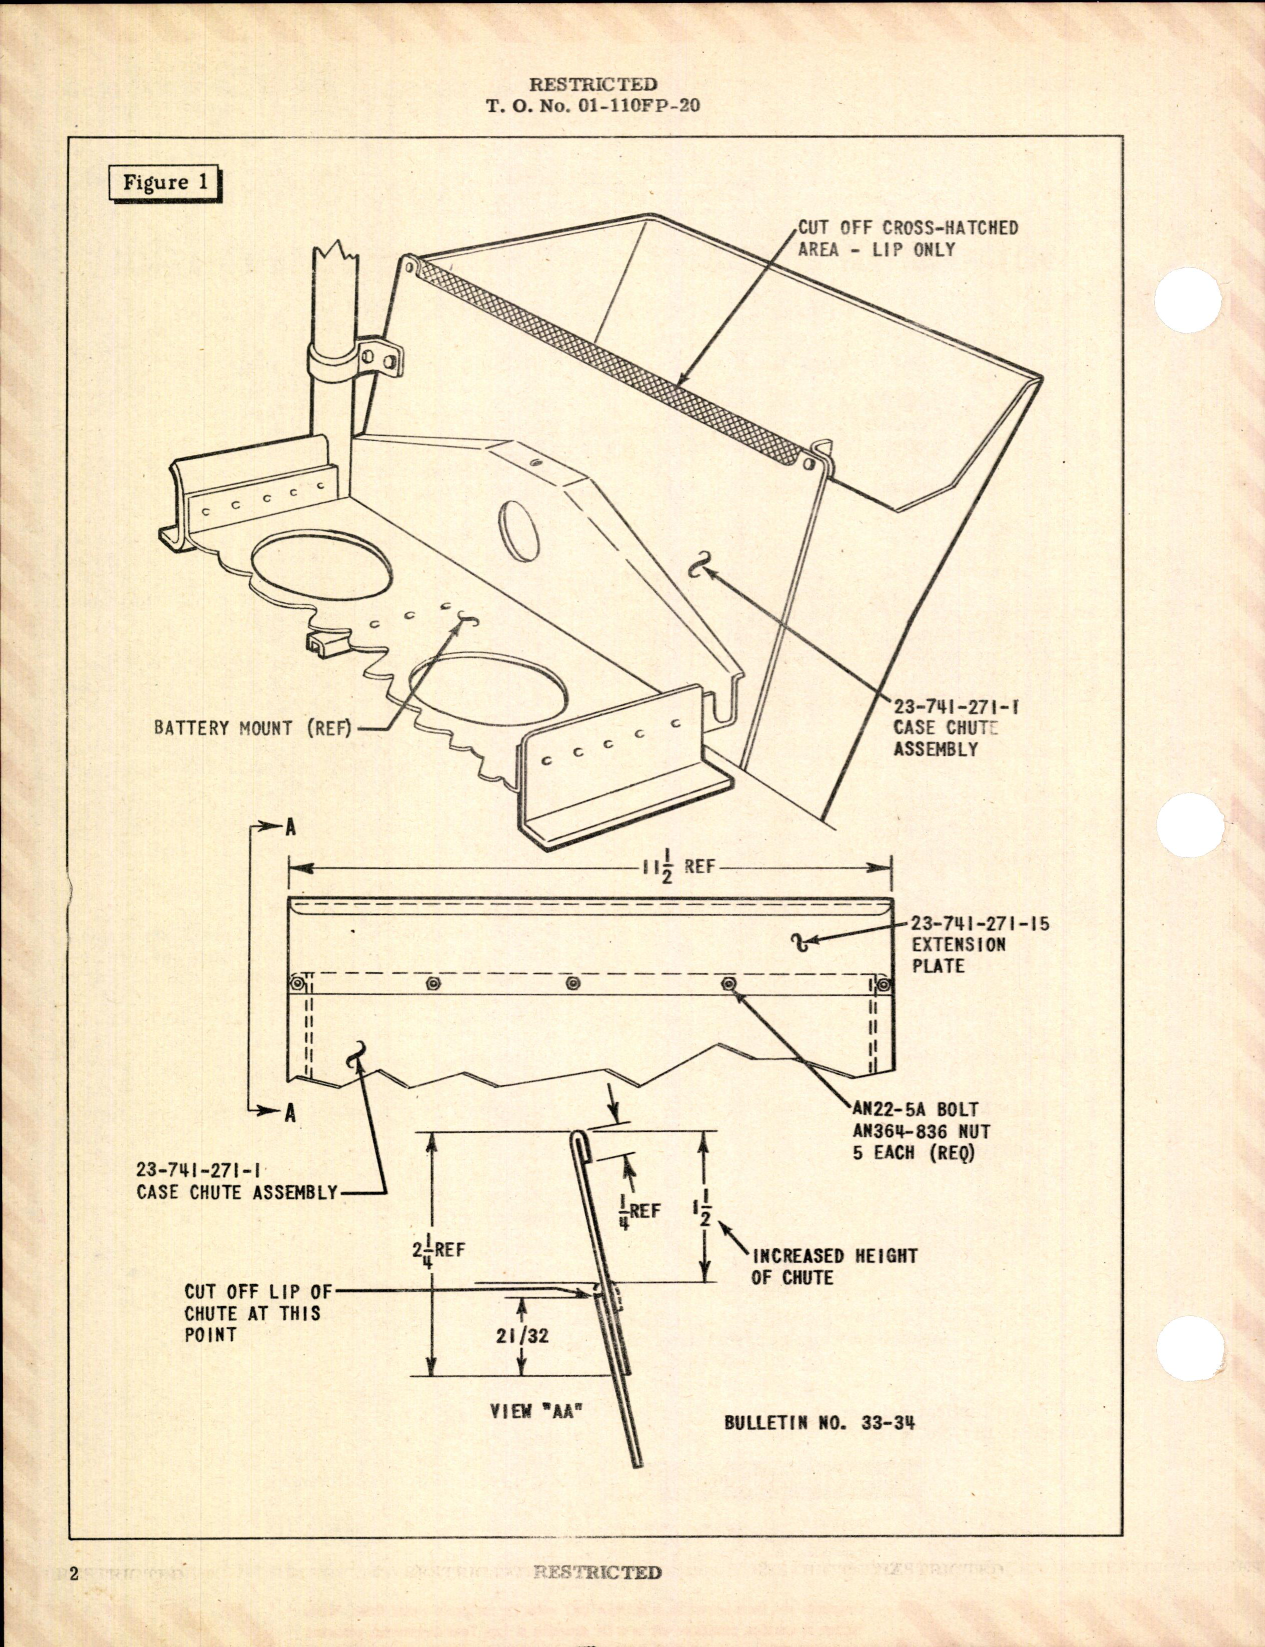 Sample page 2 from AirCorps Library document: Ejection Chute Extension Plate on 37-MM Cannon Case 